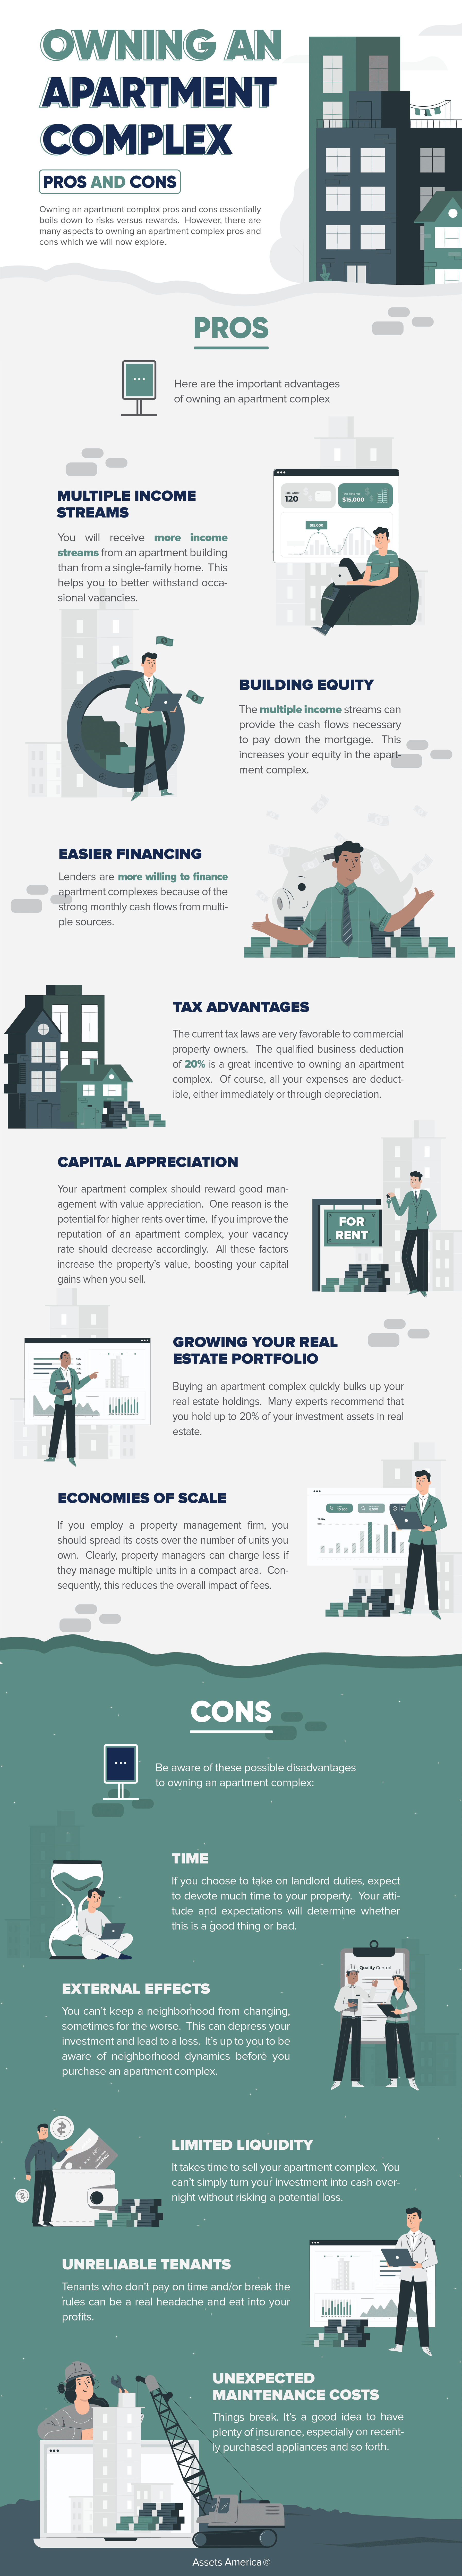 An infographic with the pros and cons of owning an apartment complex